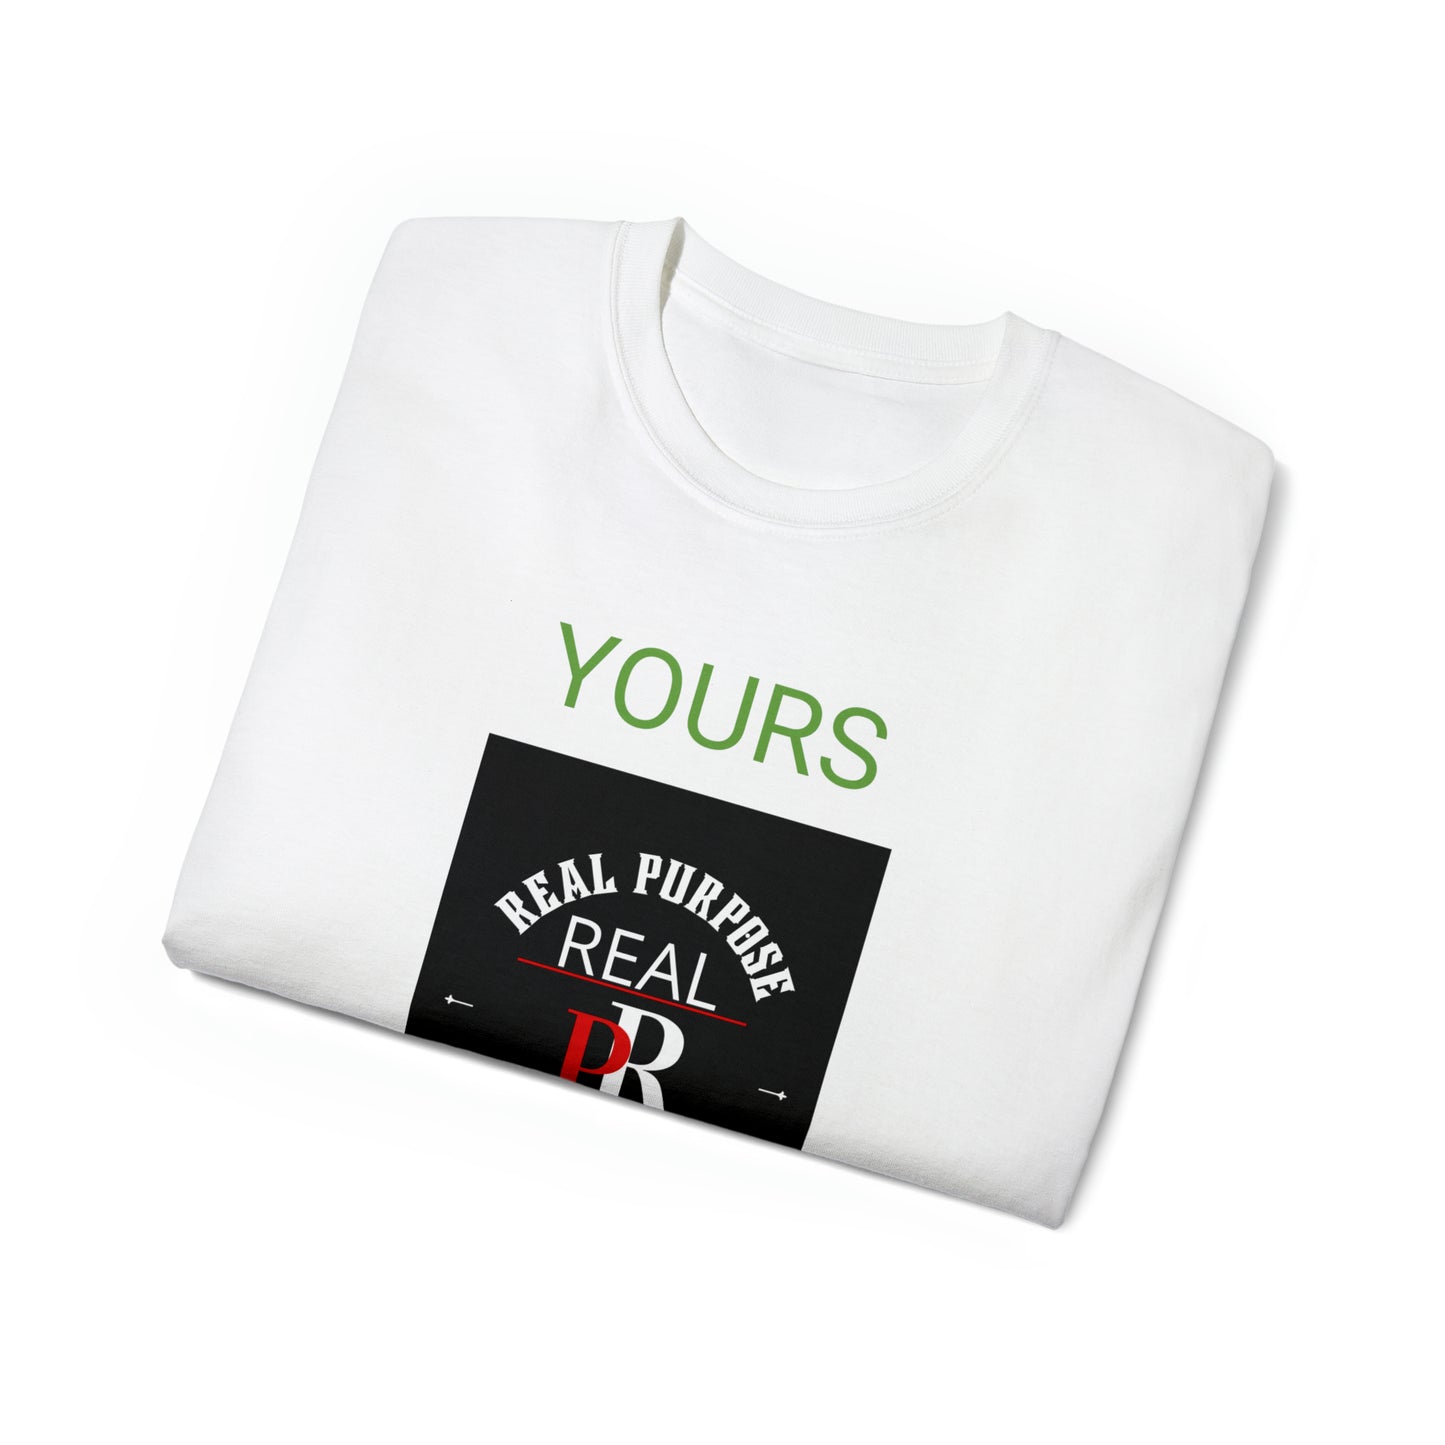 Copy of Yours Matters TShirt